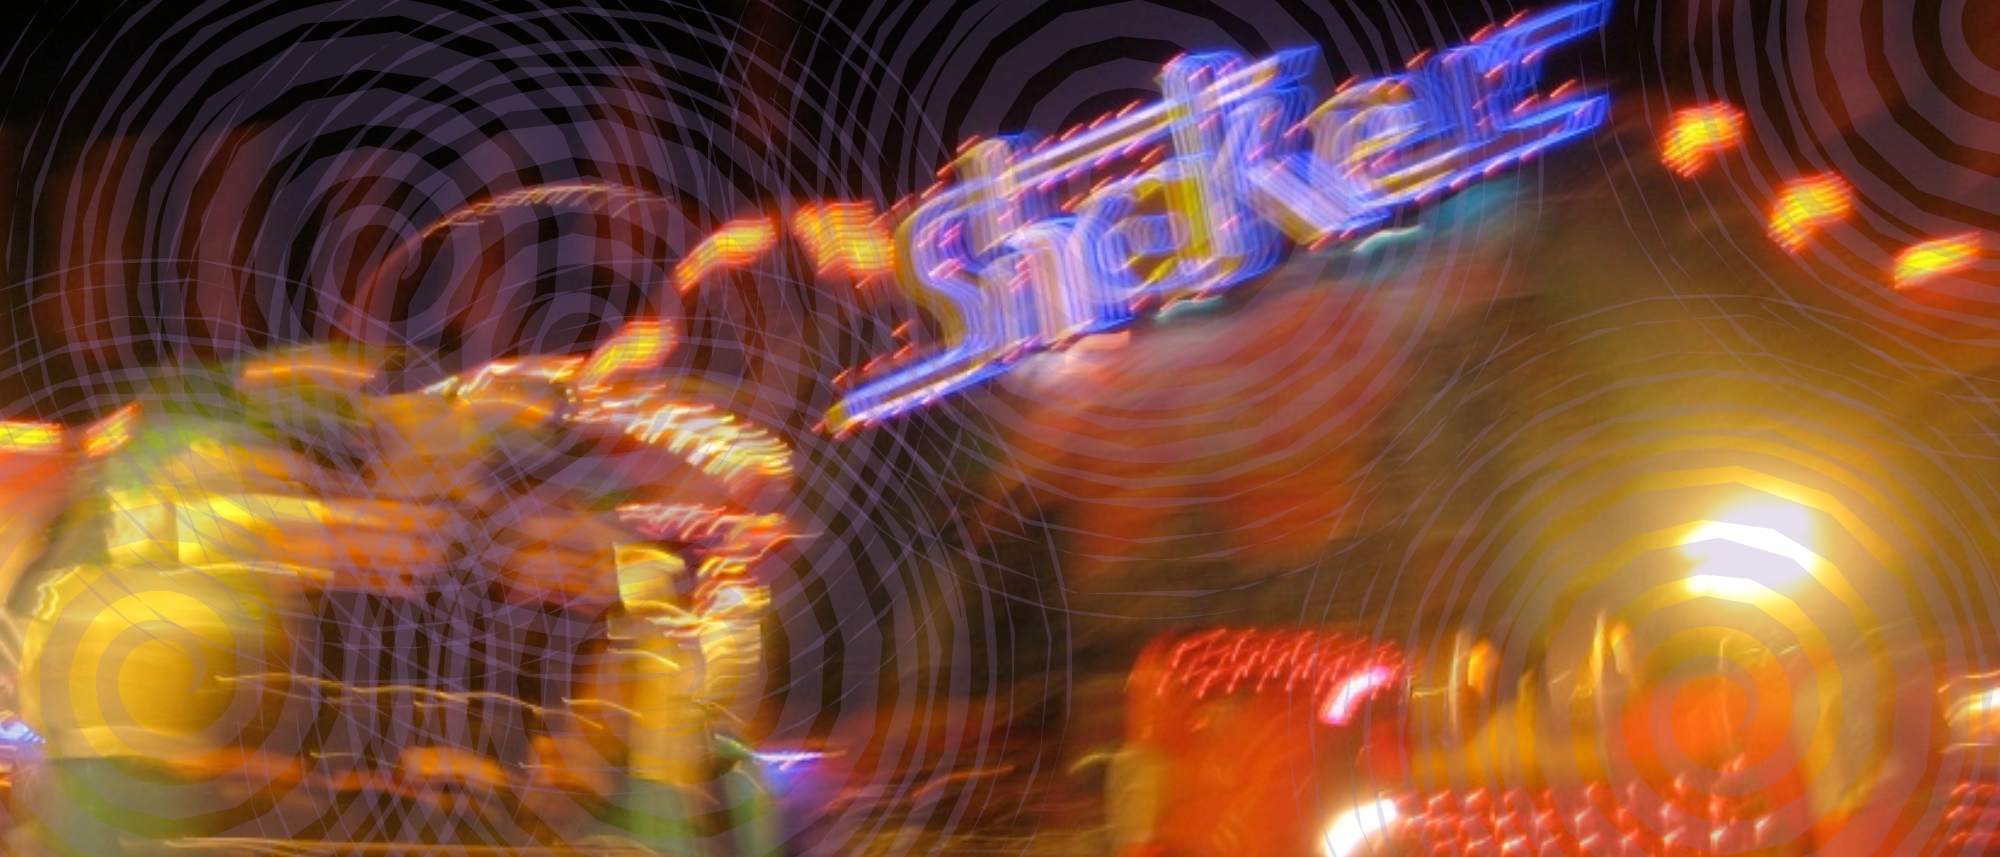 A somewhat blurry image of a lit-up carnival ride called The Shaker in motion. Overlayed are semi-transparent purple spirals in an indistinguishable pattern.